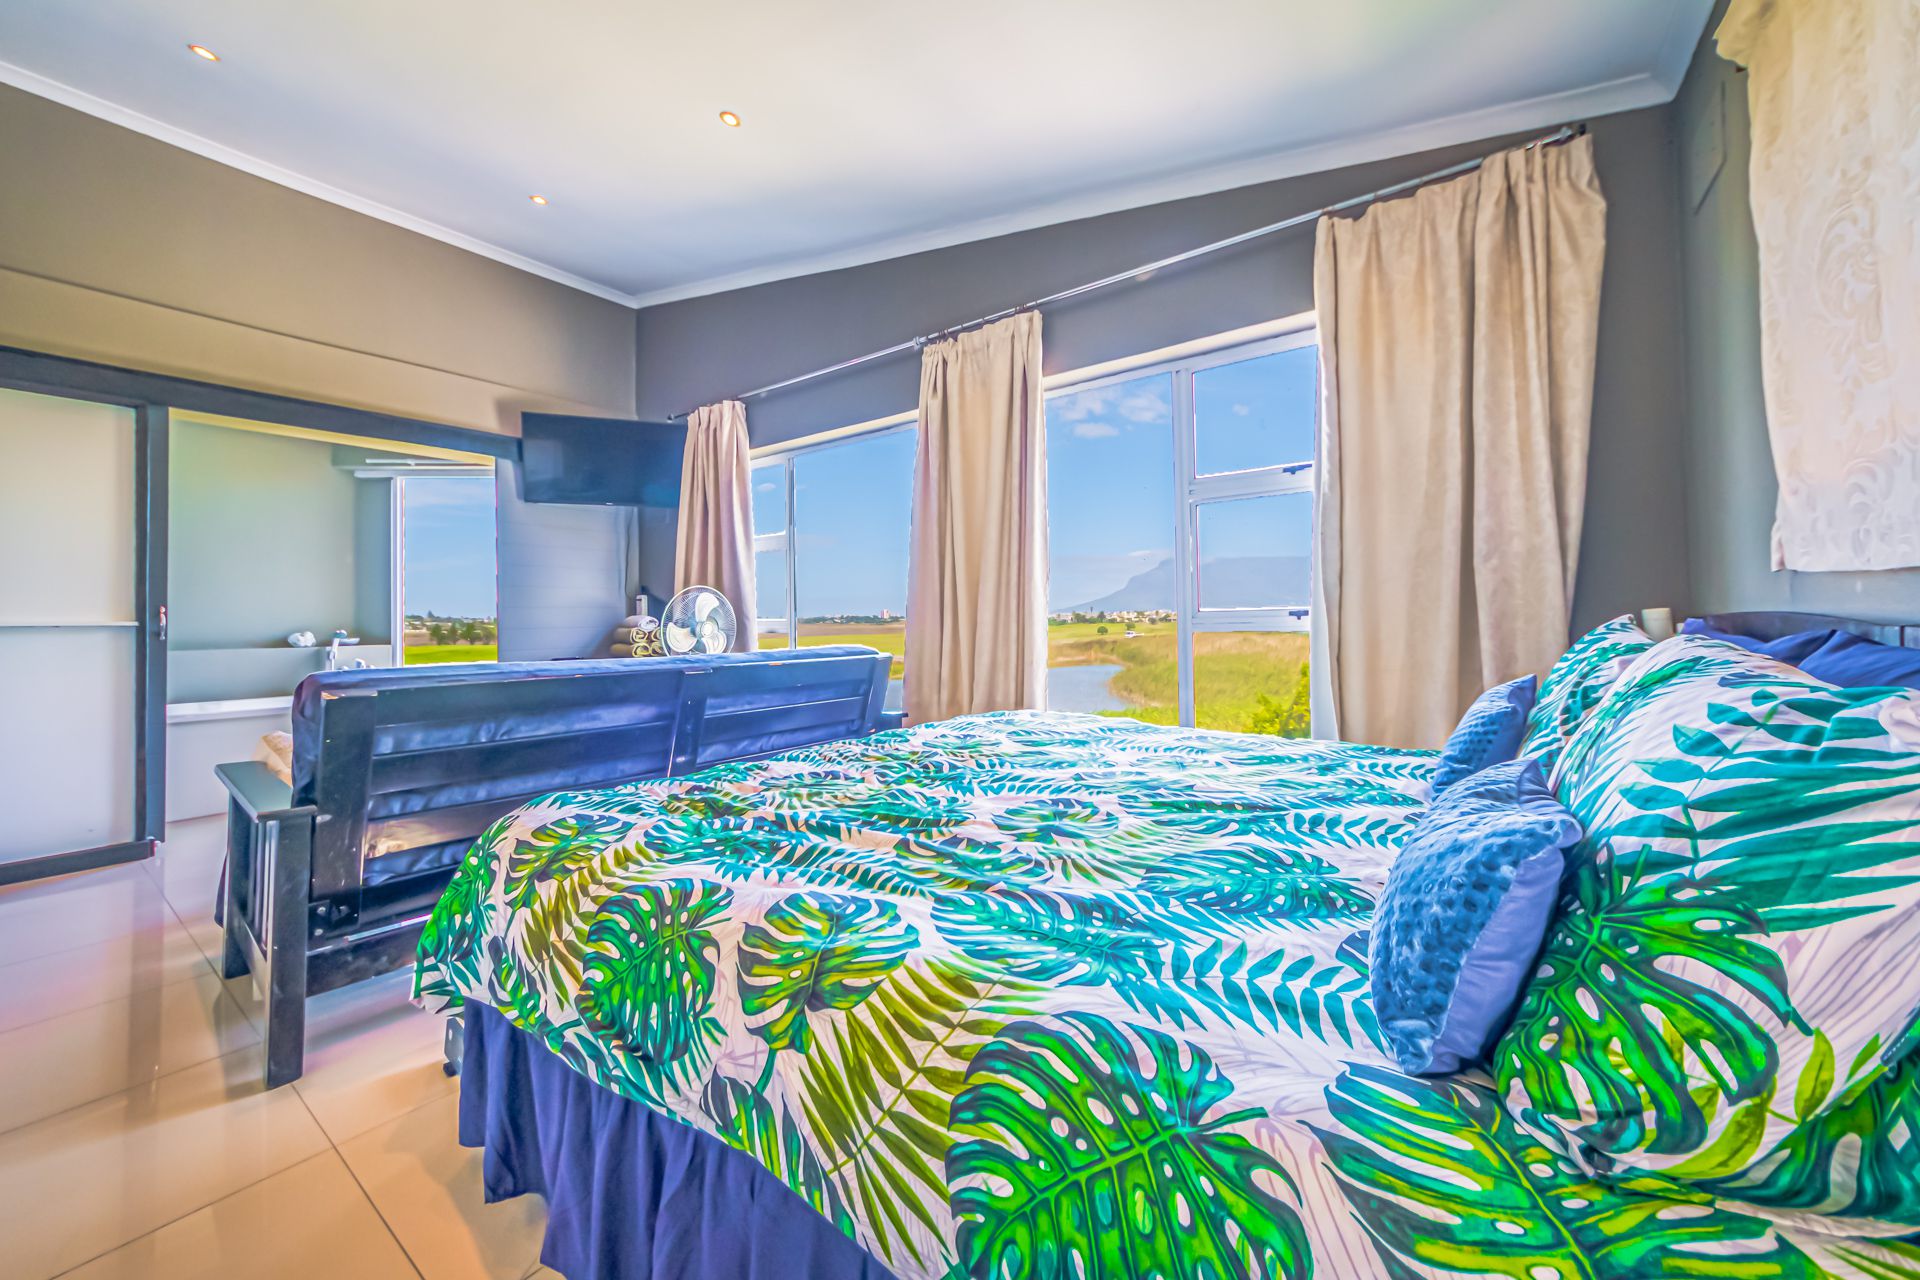 Gaia Guest House And Healing Hydro Sunset Beach Cape Town Western Cape South Africa Complementary Colors, Bedroom